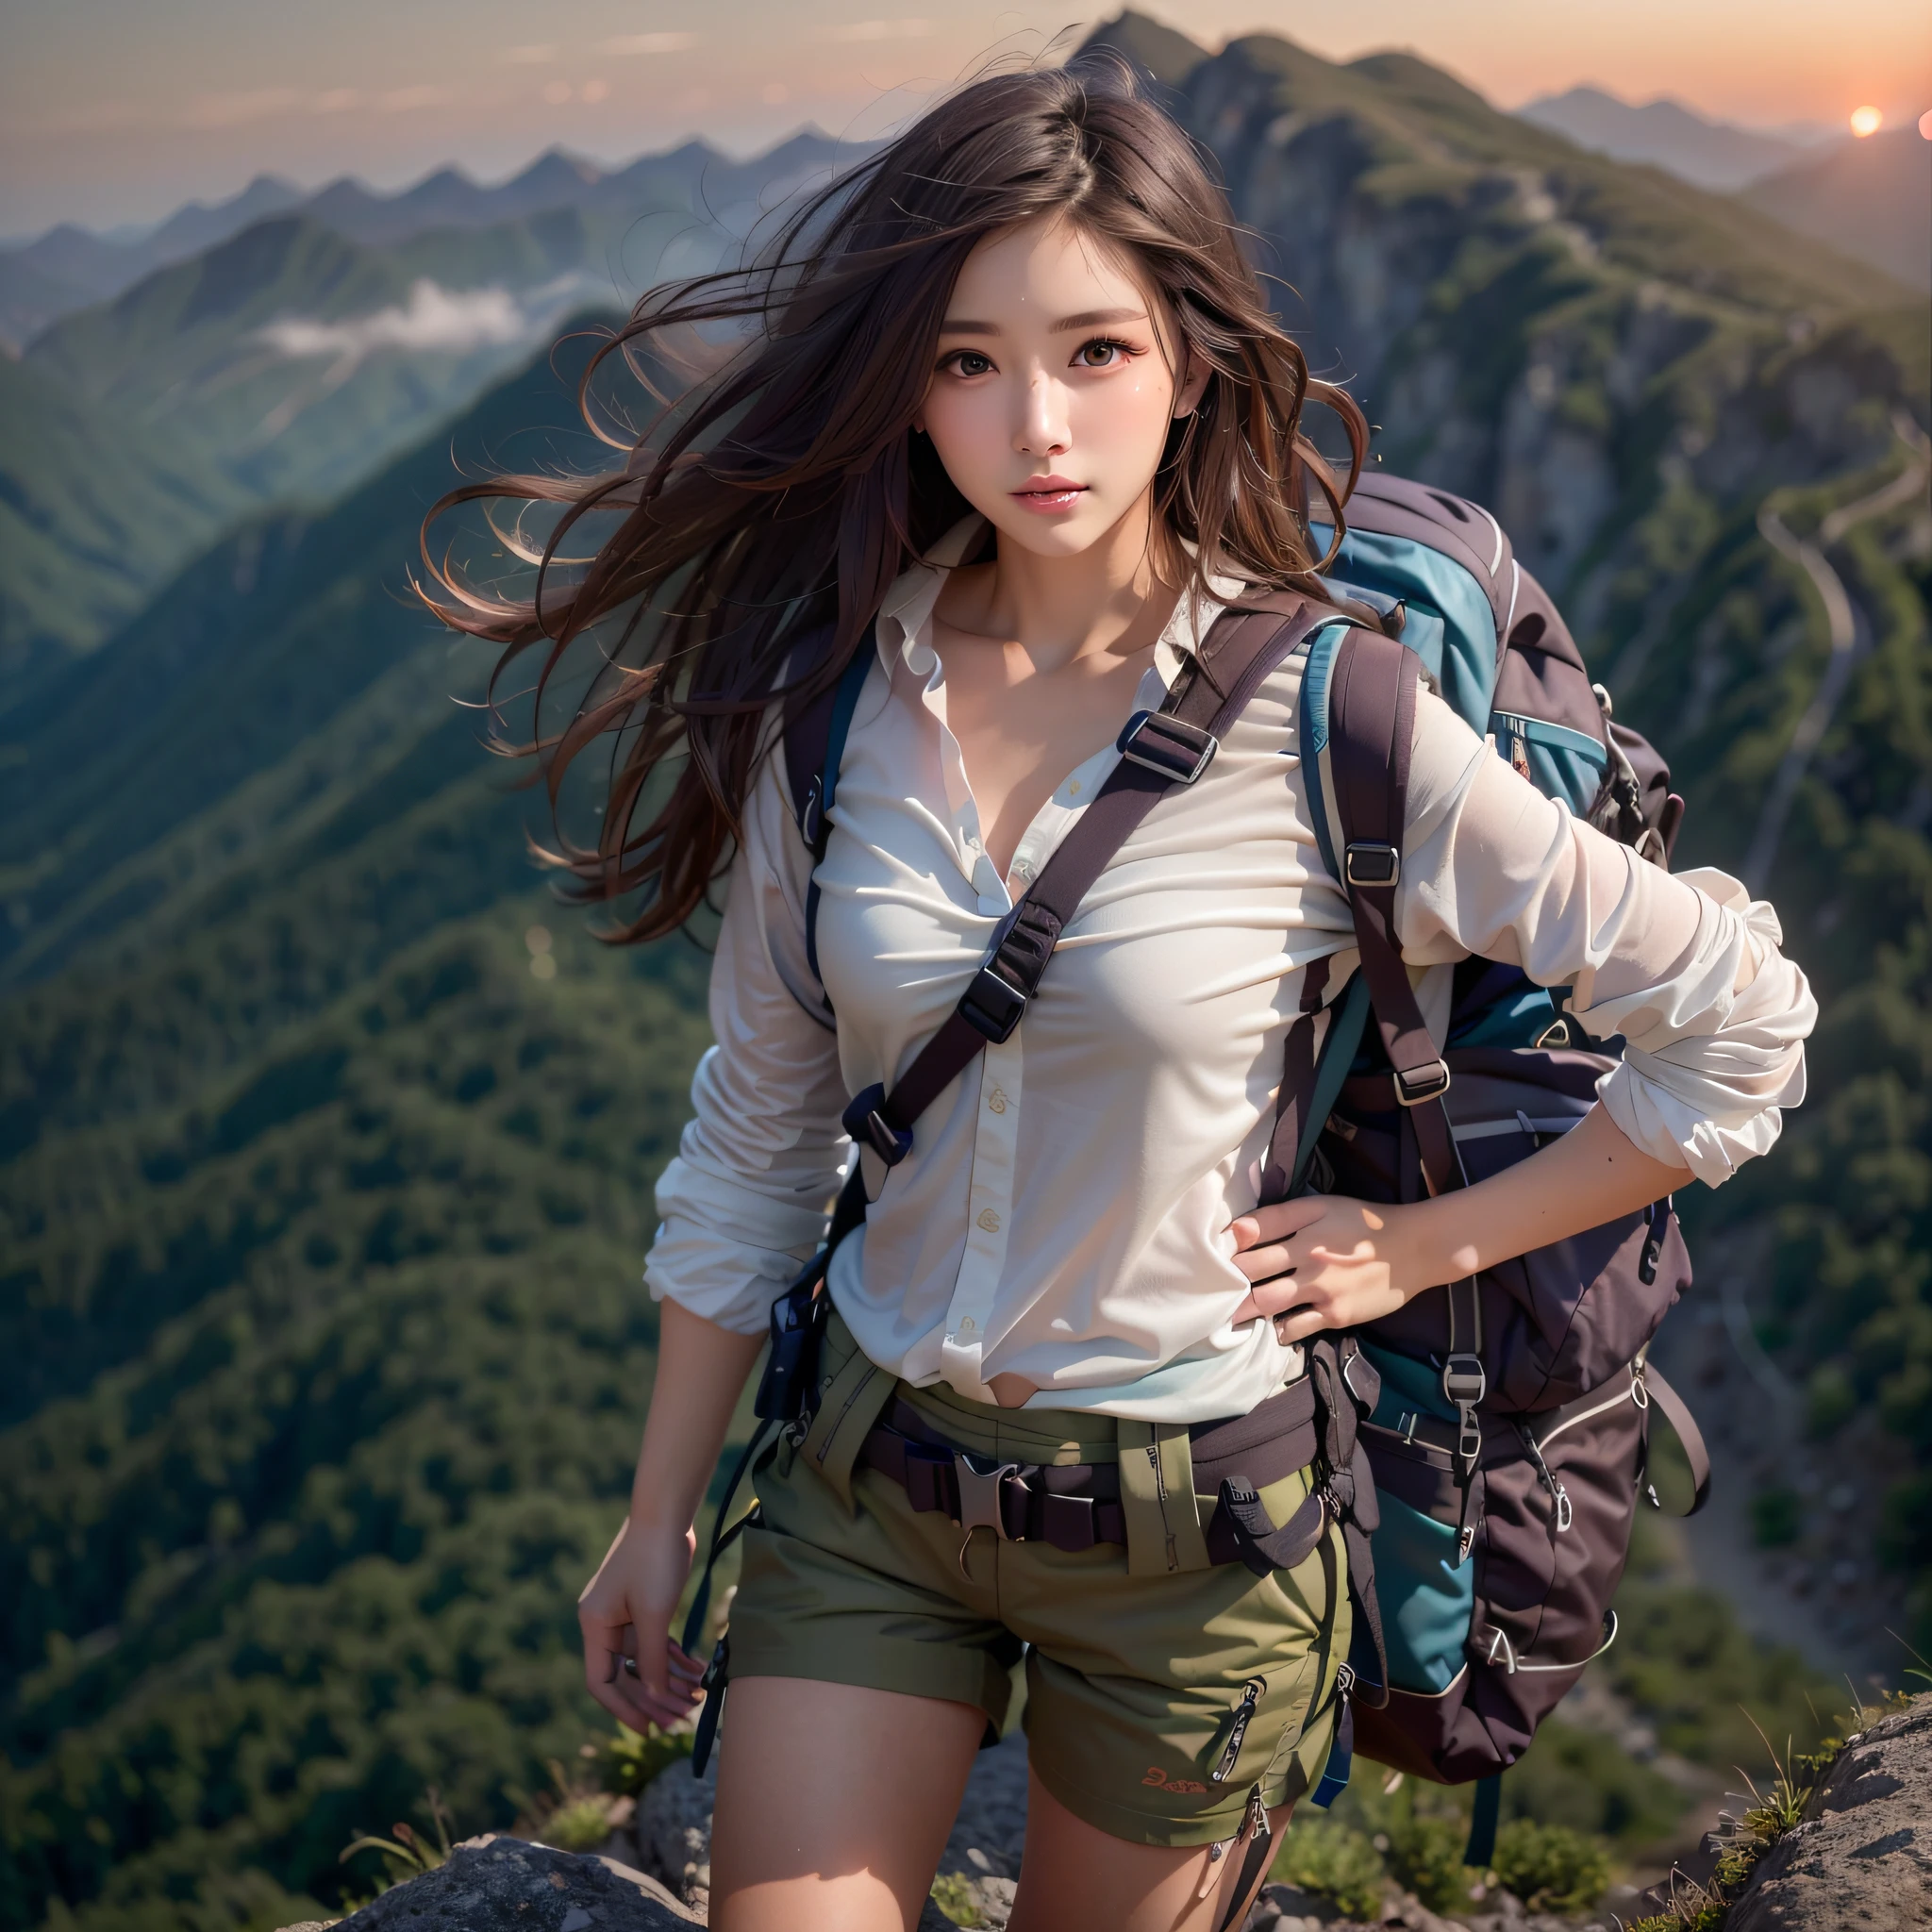 (Naturescape photography), (best quality), masterpiece:1.2, ultra high res, photorealistic:1.4, RAW photo, (Magnificent mountain, sea of clouds), (On a very high mountain peak), (sunset), (wideangle shot),  (Show cleavage:0.8),
(1girl), (Photo from the knee up:1.3), (18 years old), (smile:0.9), (shiny skin), (semi-long hair, dark brown hair), 
(loose white shirts, Trekking shorts), (Carrying a large backpack), 
(ultra detailed face), (ultra Beautiful fece), (ultra detailed eyes), (ultra detailed nose), (ultra detailed mouth), (ultra detailed arms), (ultra detailed body), pan focus, looking at the audience